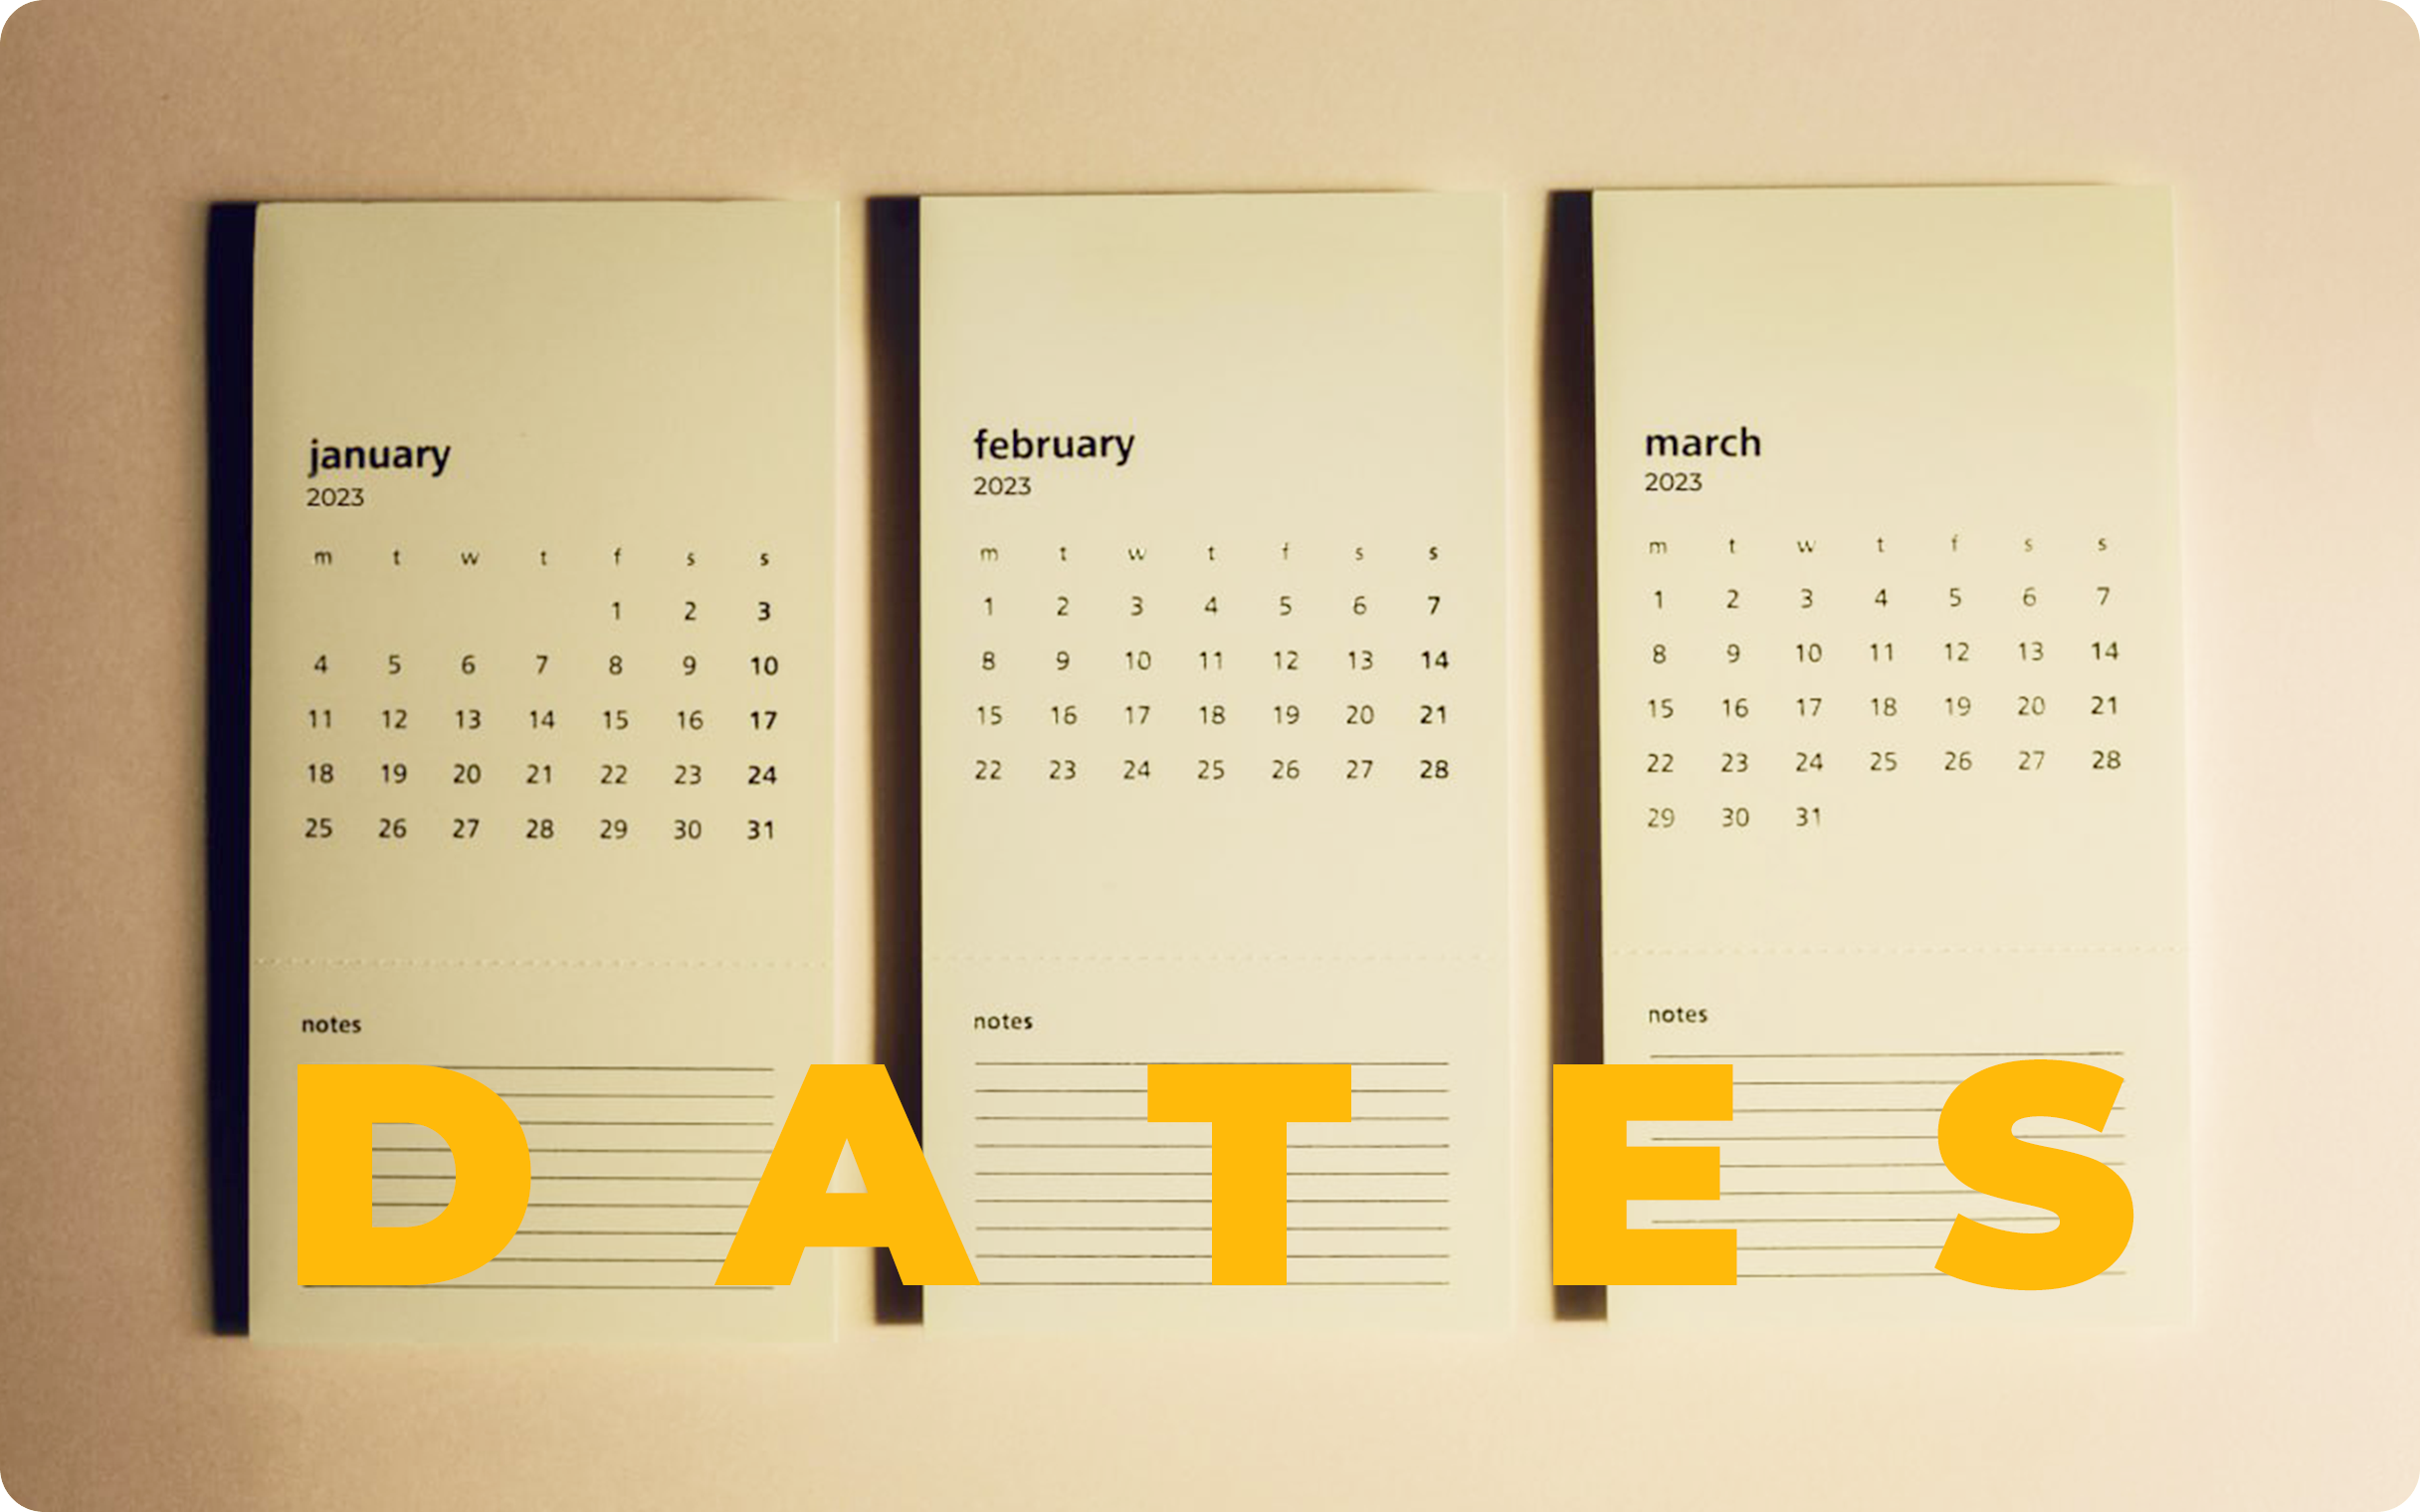 How to talk about dates English